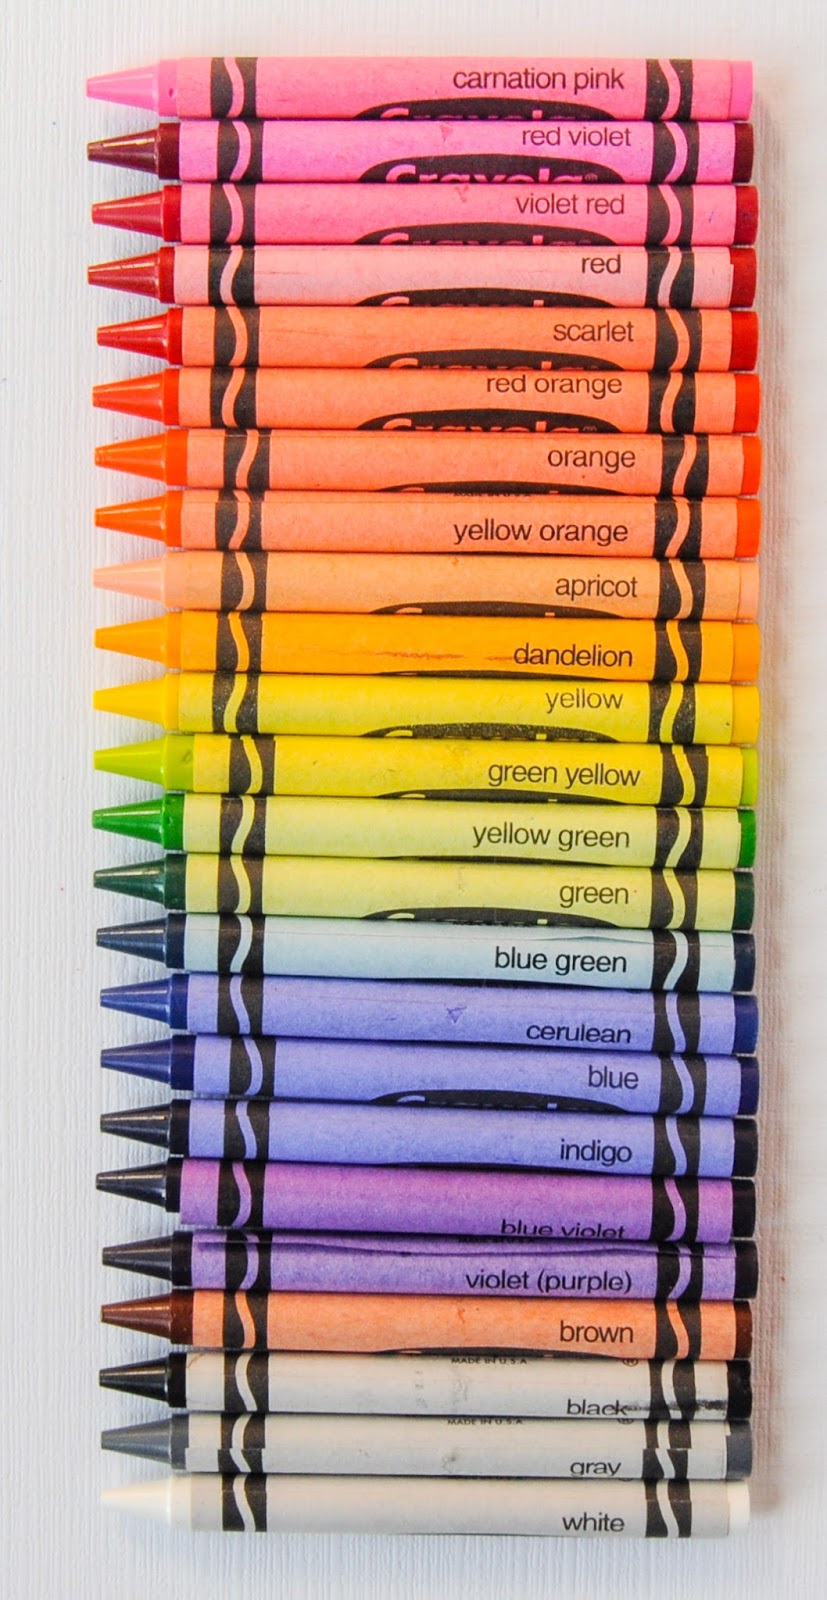 Crayola 52-3024 Crayons 24 Colors for sale online